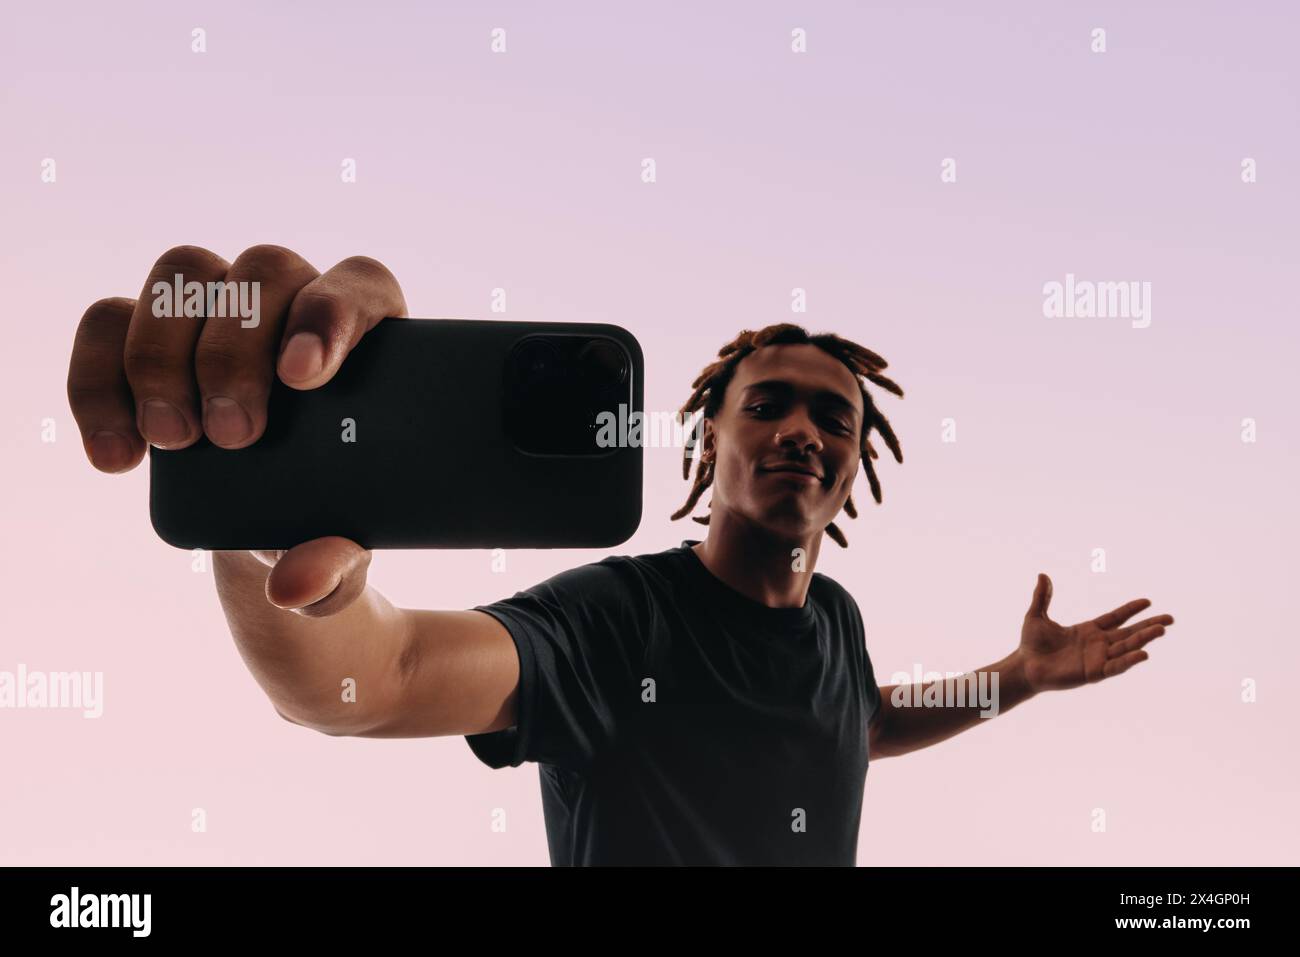 Dreadlocked young man holds a smartphone in a selfie pose against a pink studio backdrop. Gen Z man capturing a self-portrait. Stock Photo